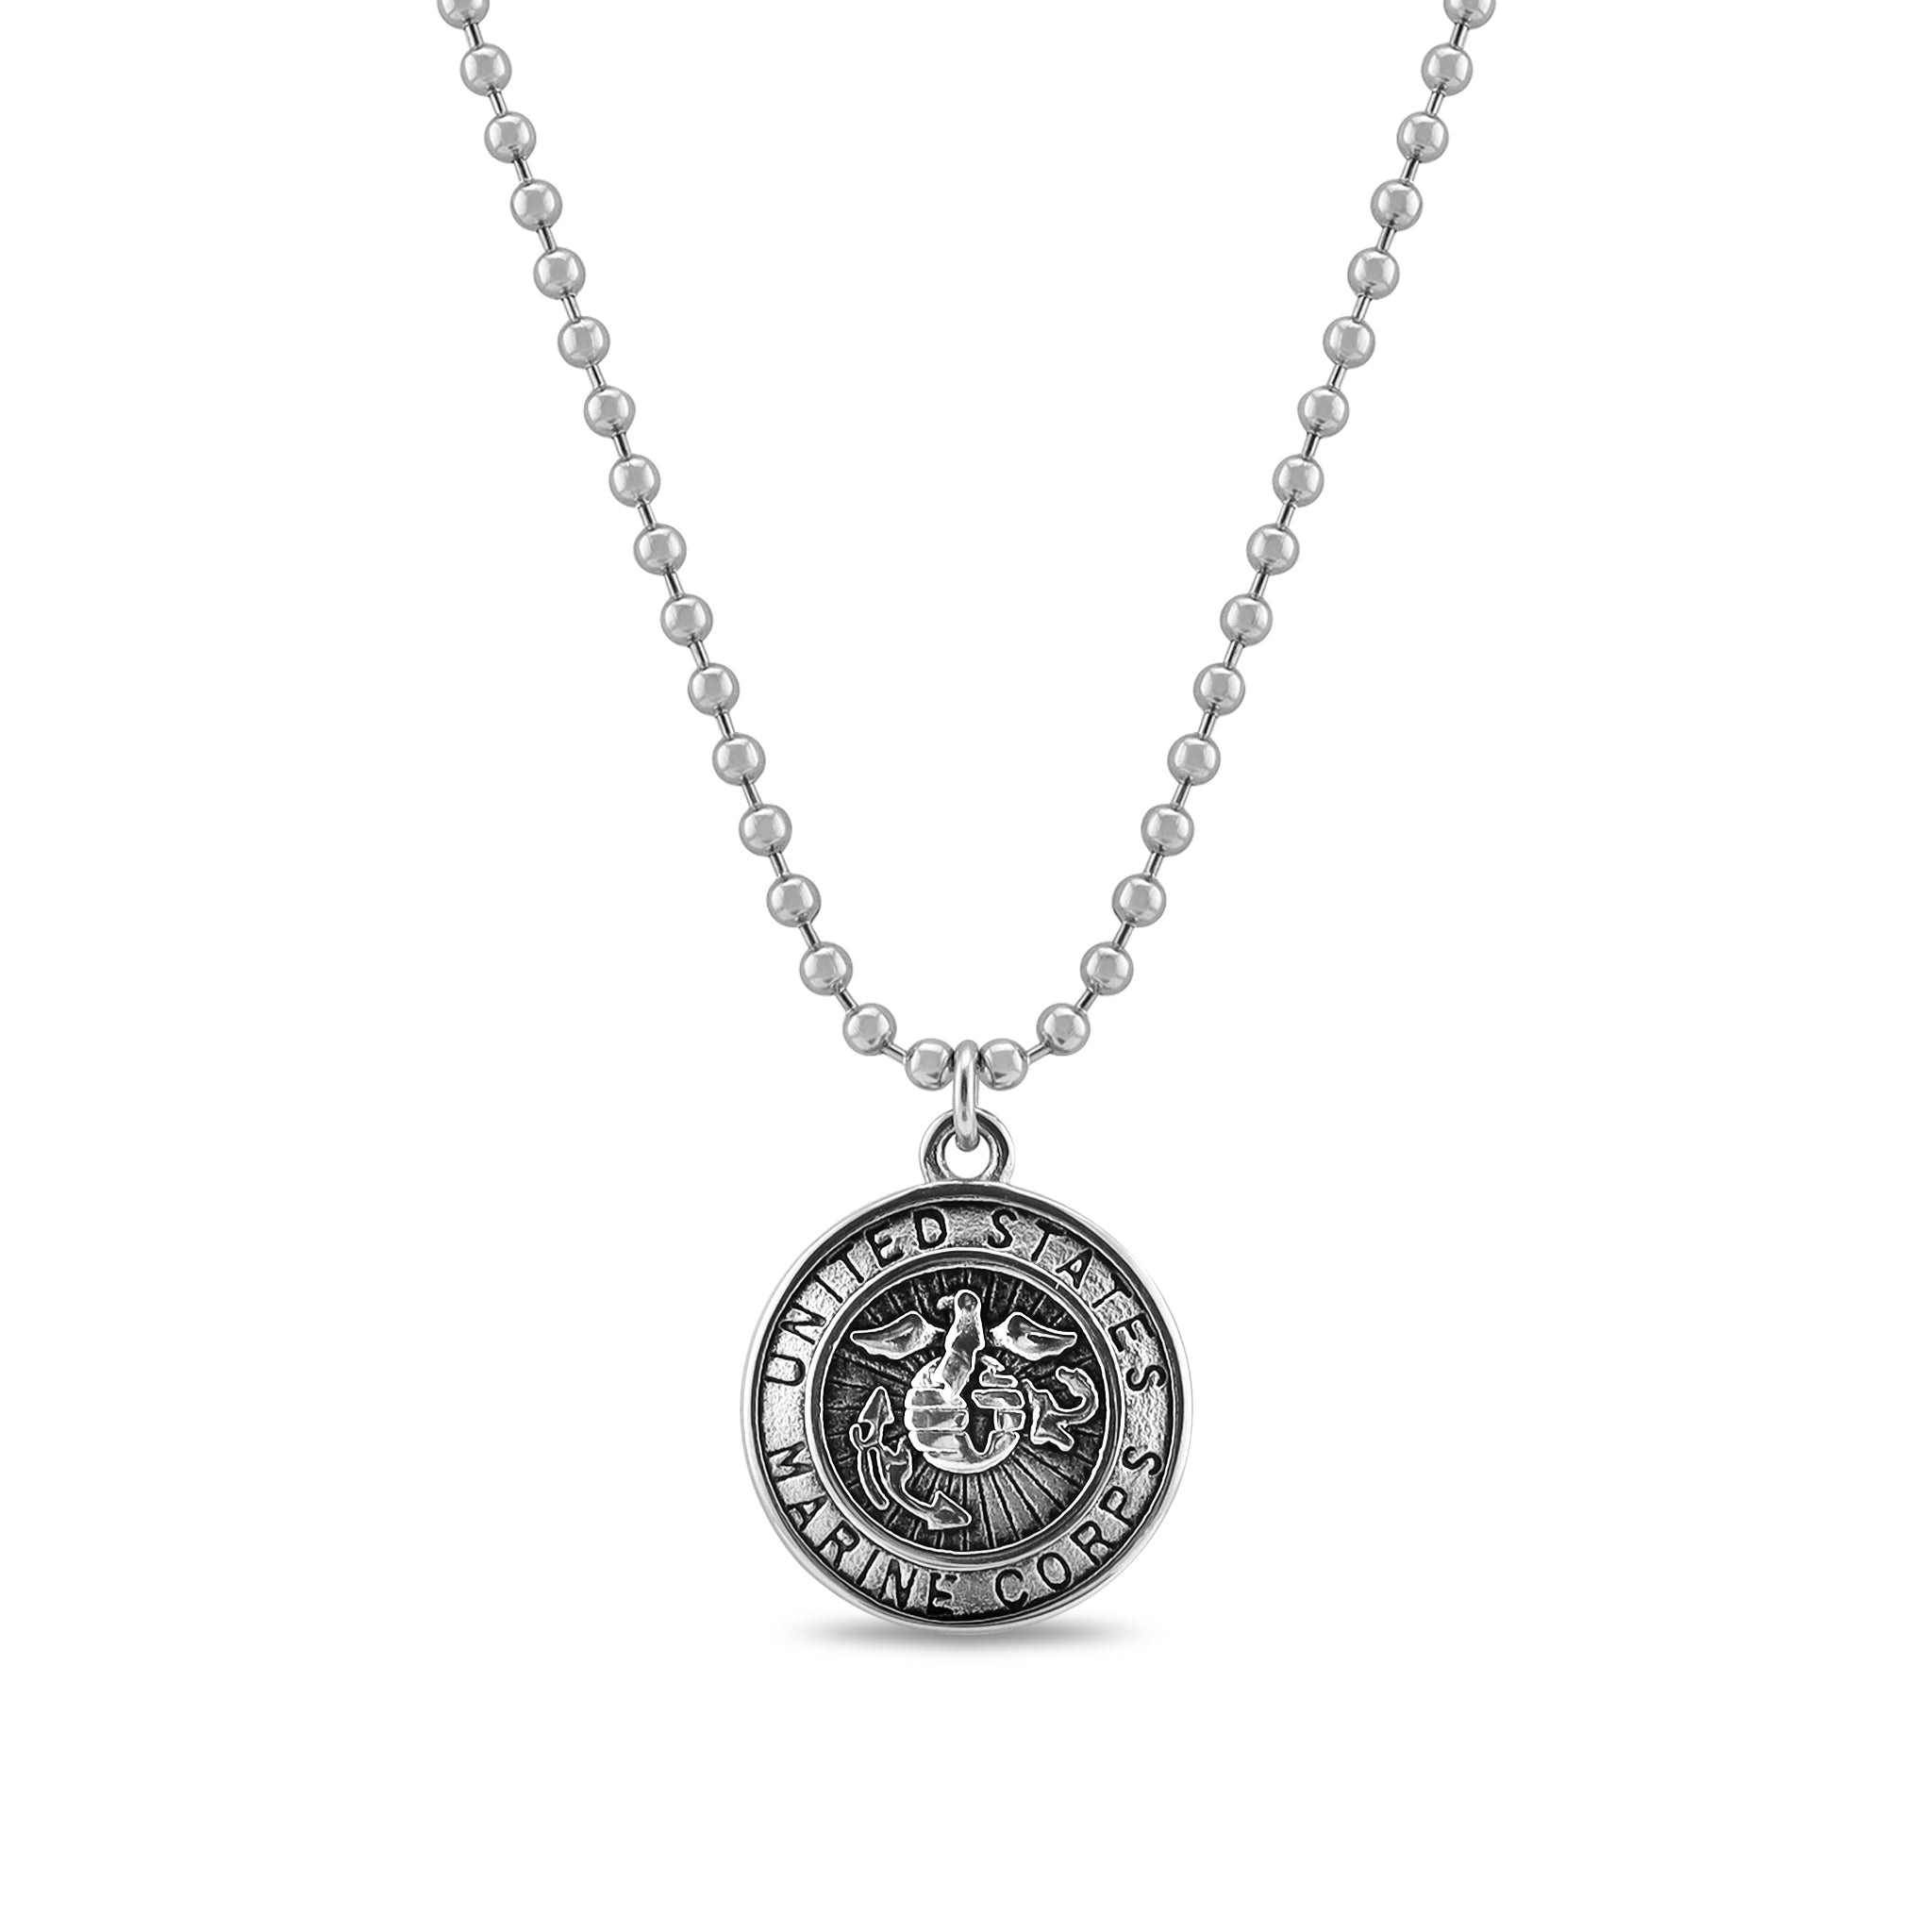 6mm High-Polished Stainless Steel Military Ball Chain Necklace, 24 inches +  Gift Box 